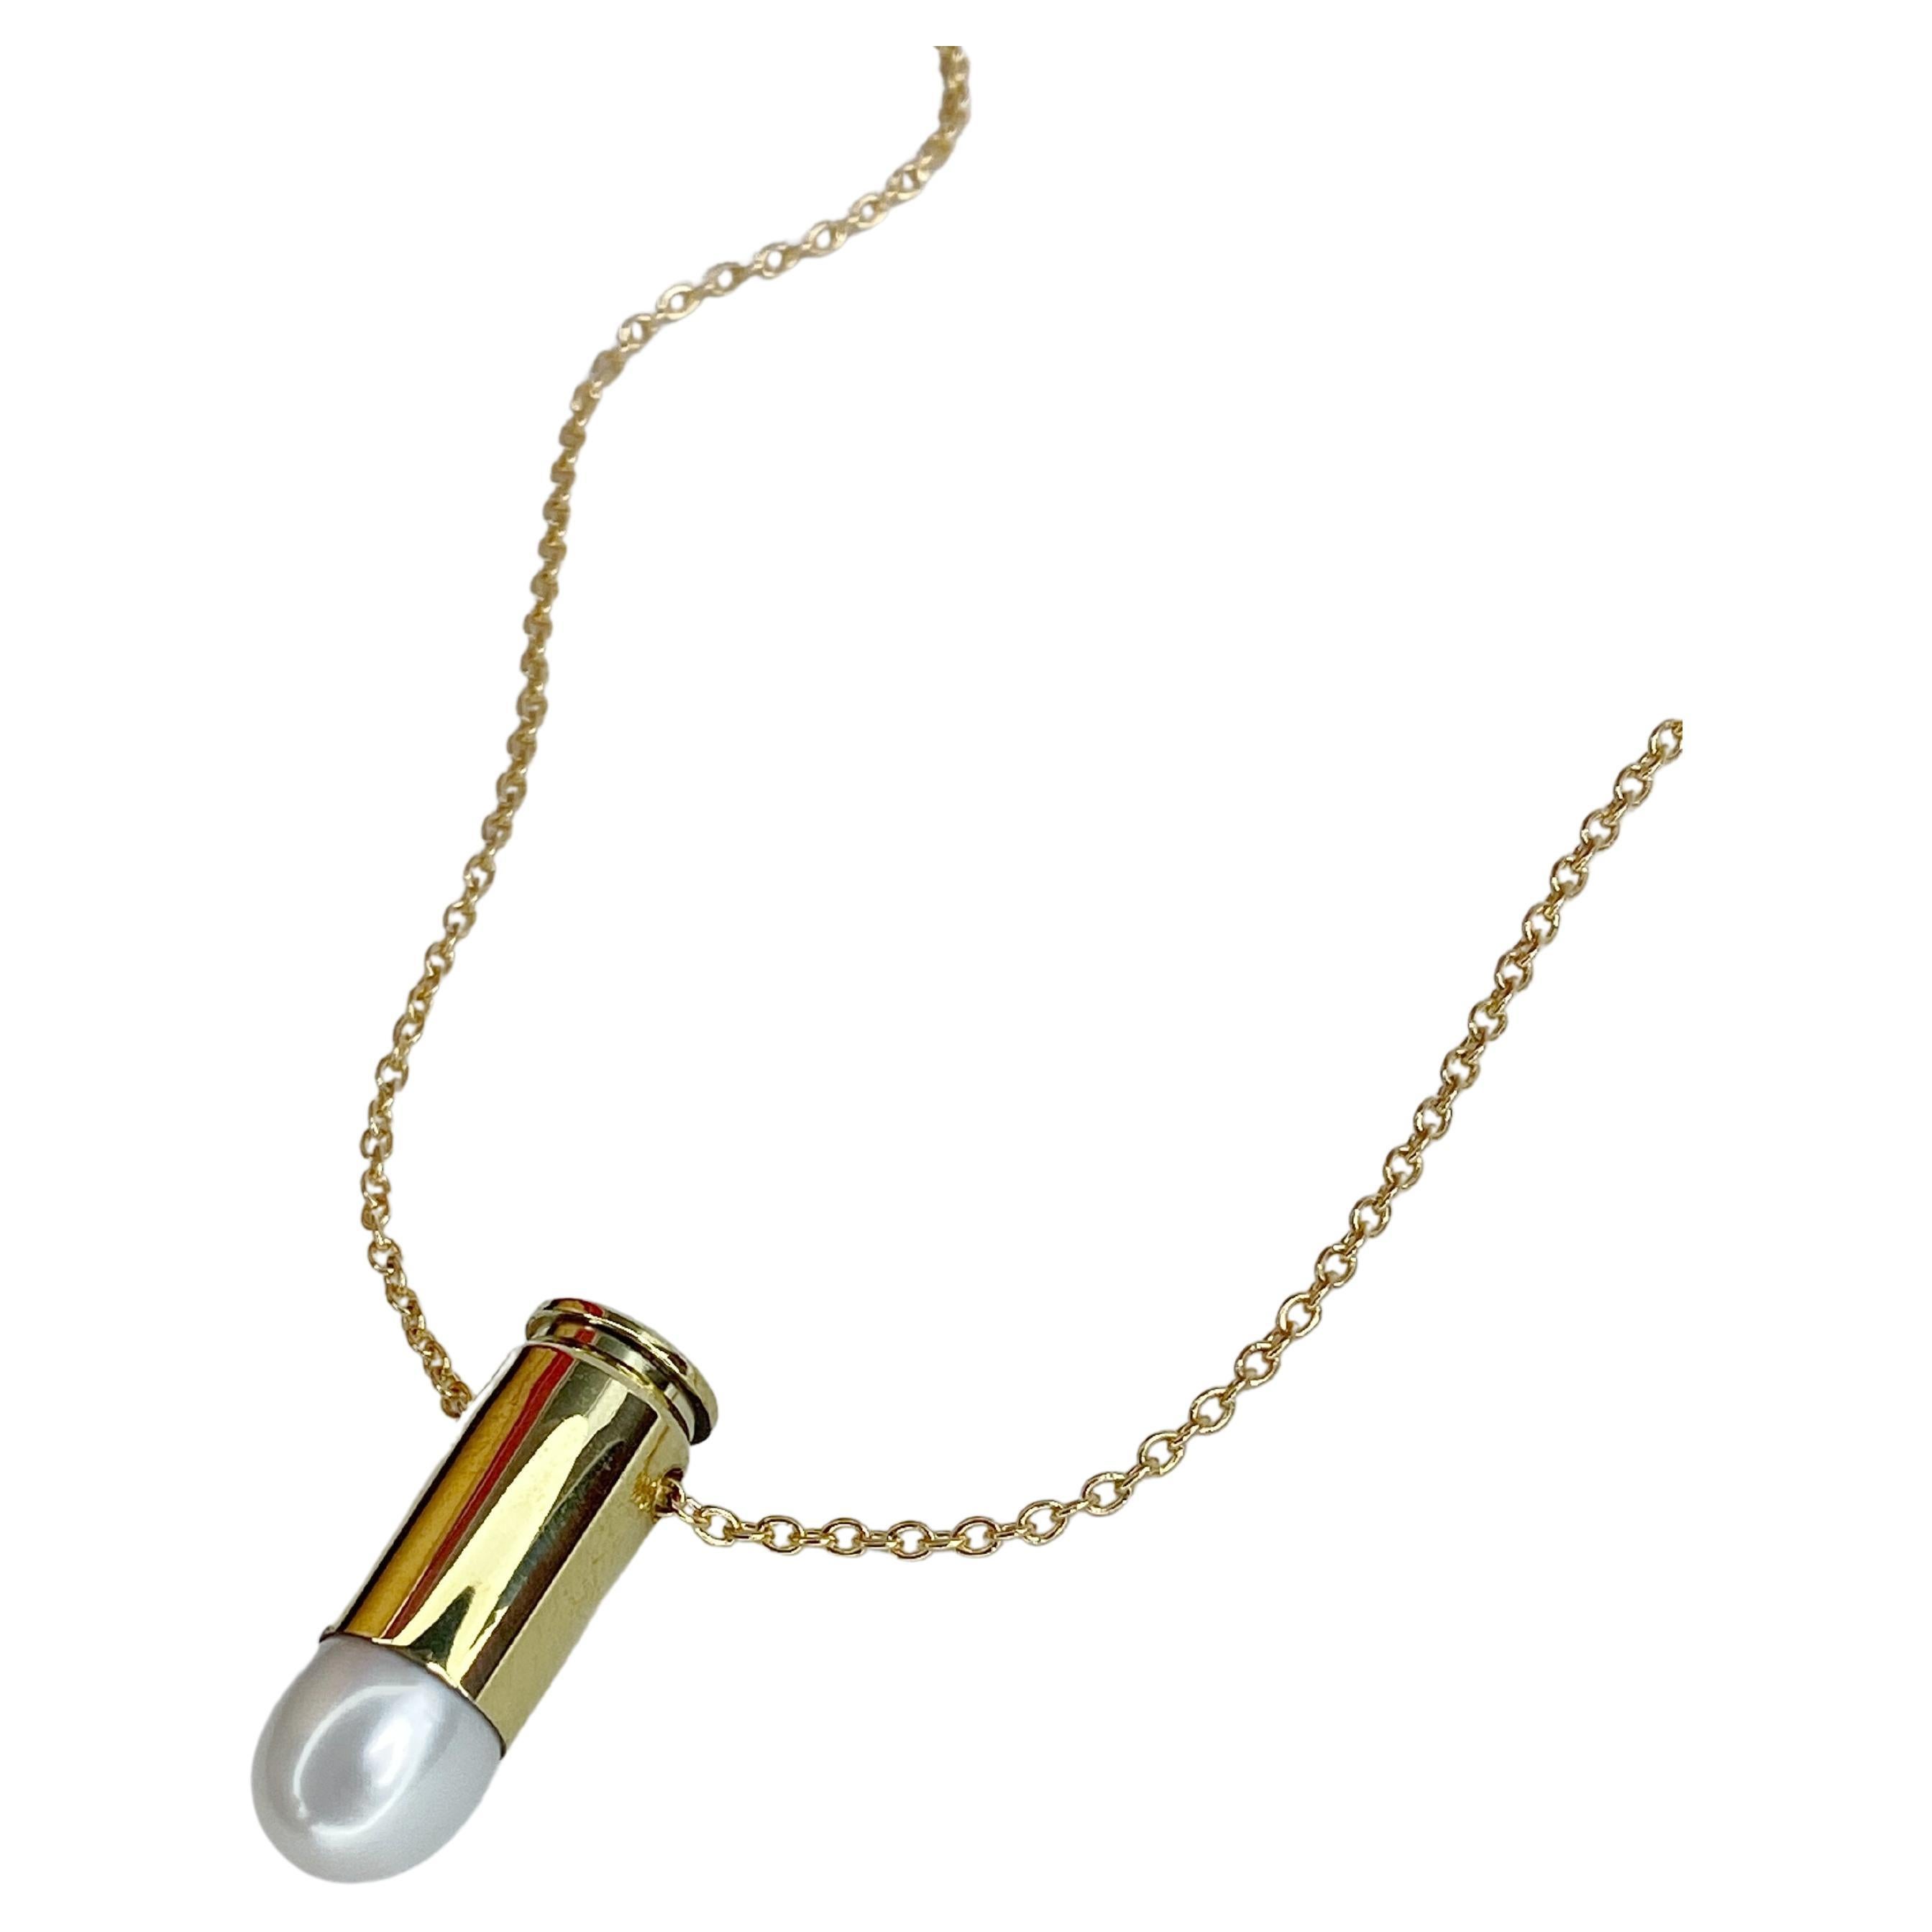 Sold at Auction: GUCCI Pill Box Pendant Chain Necklace, Italy